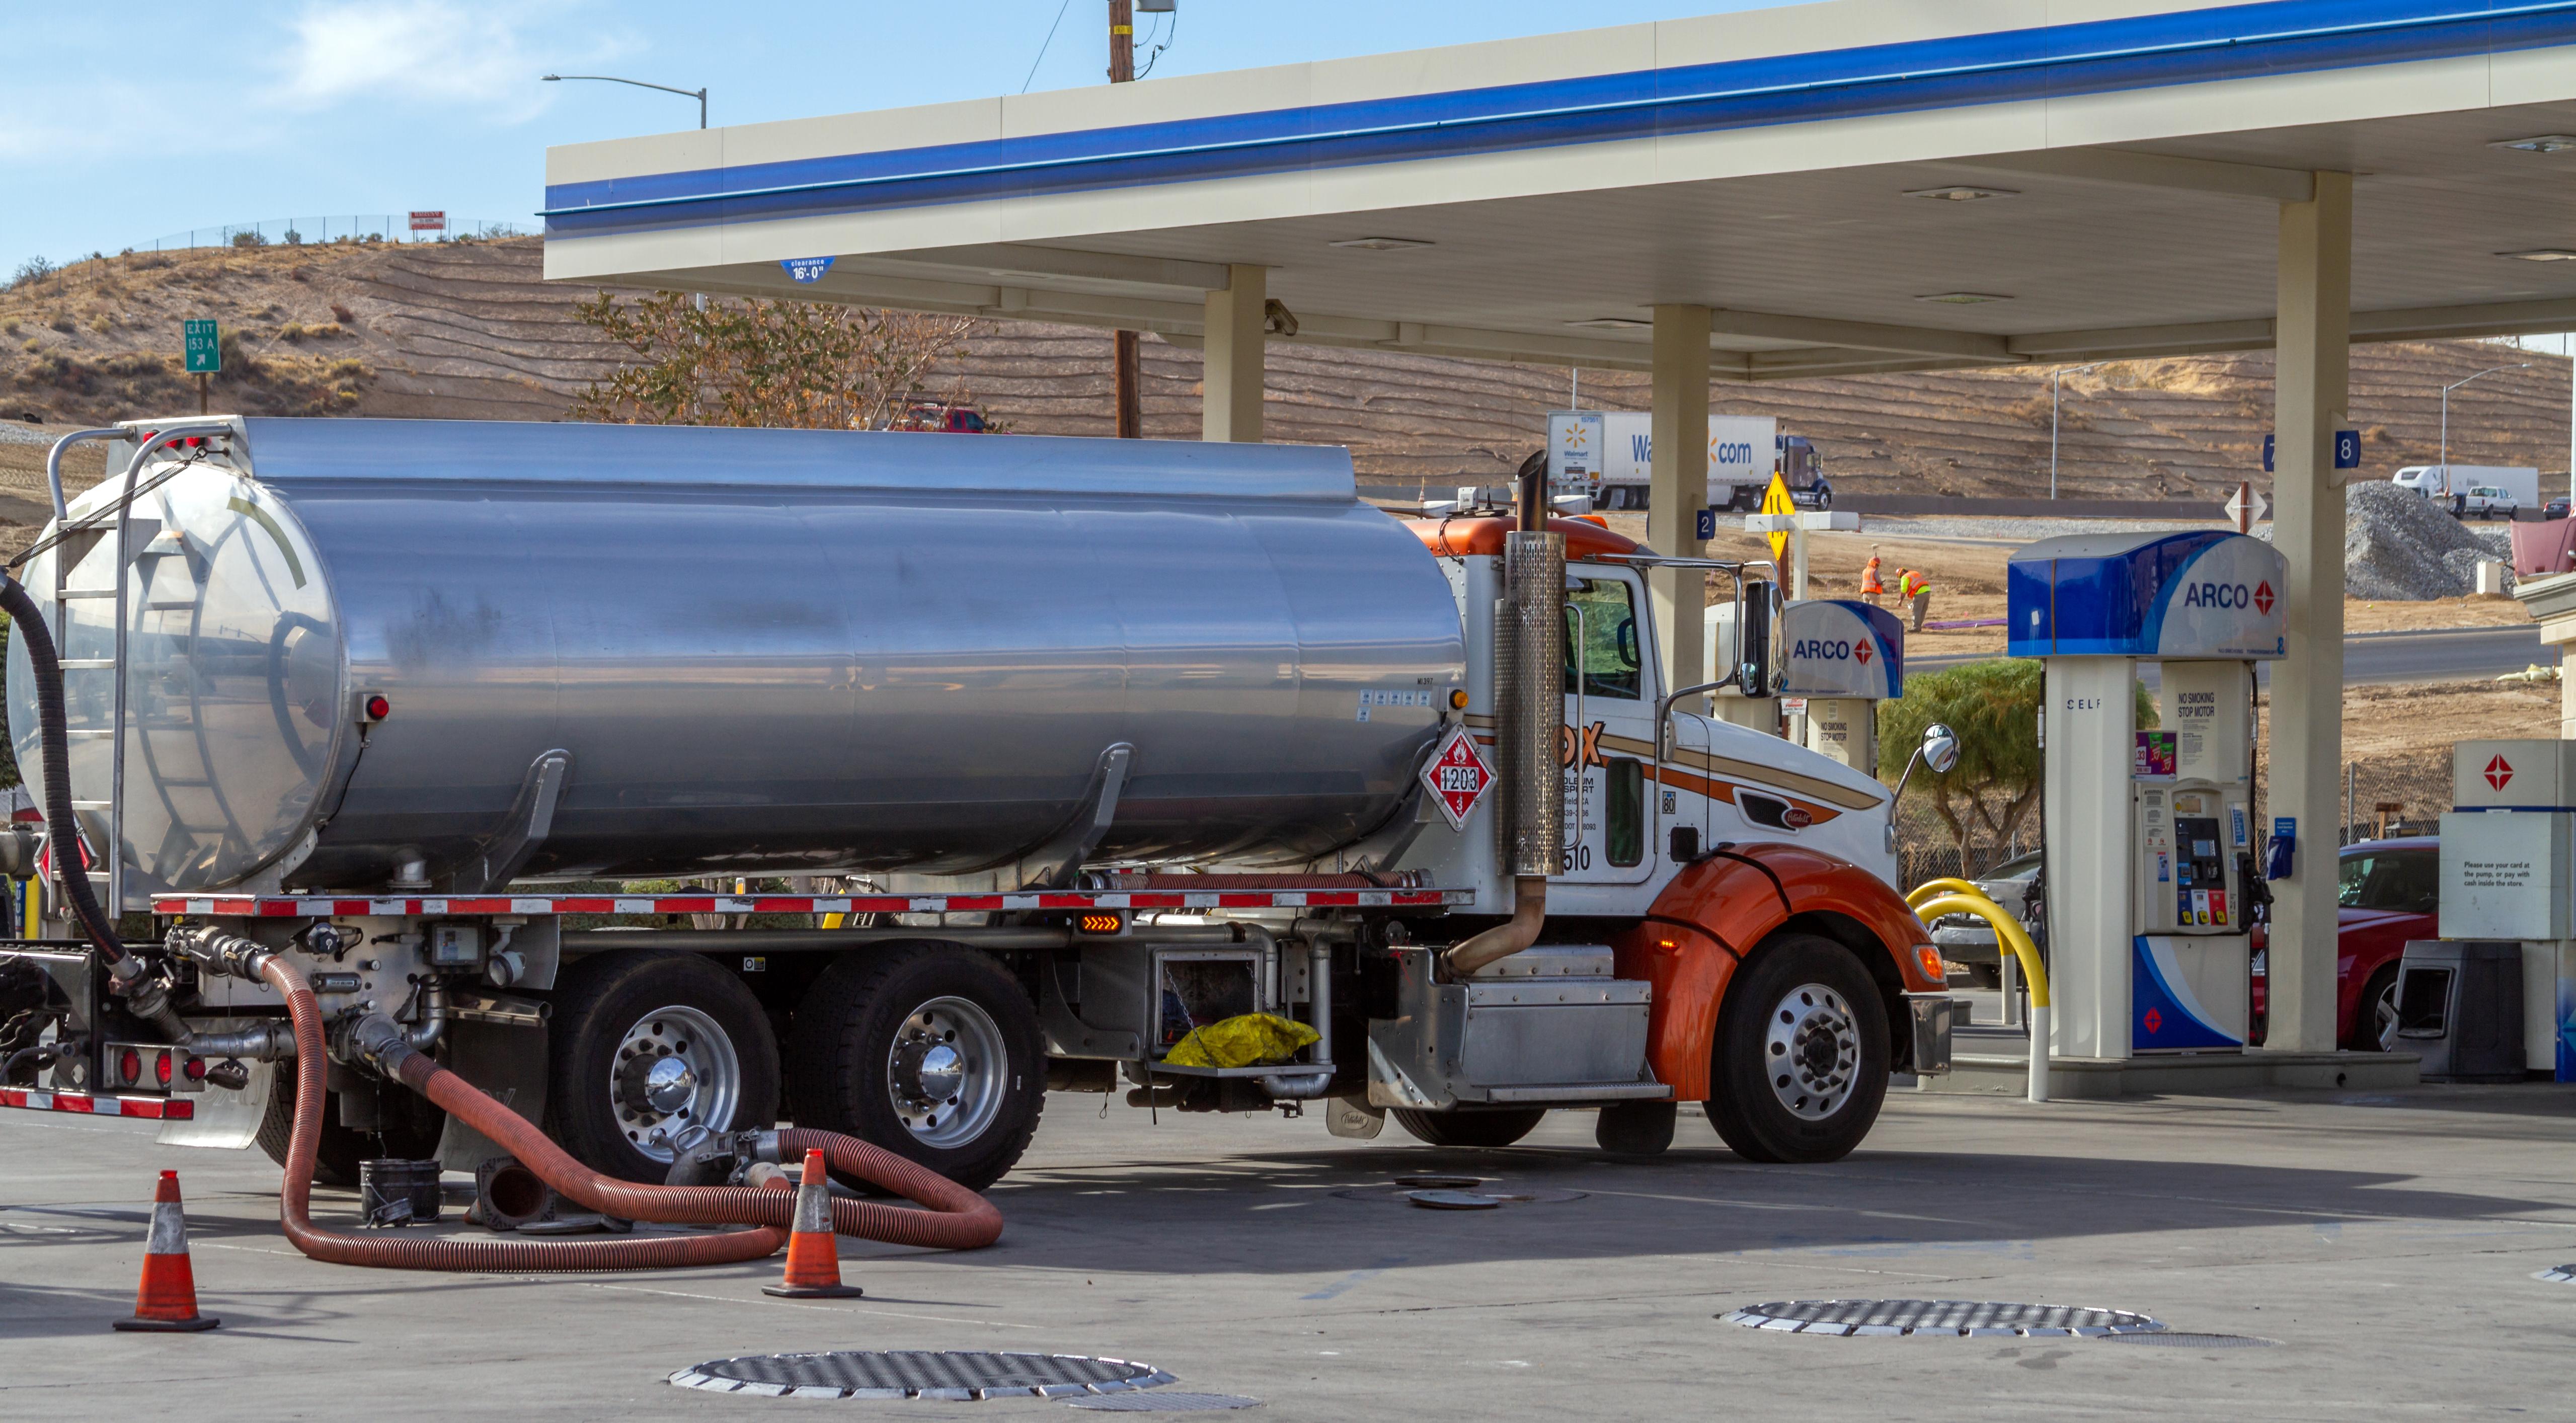 Gas tanker truck at gas station.